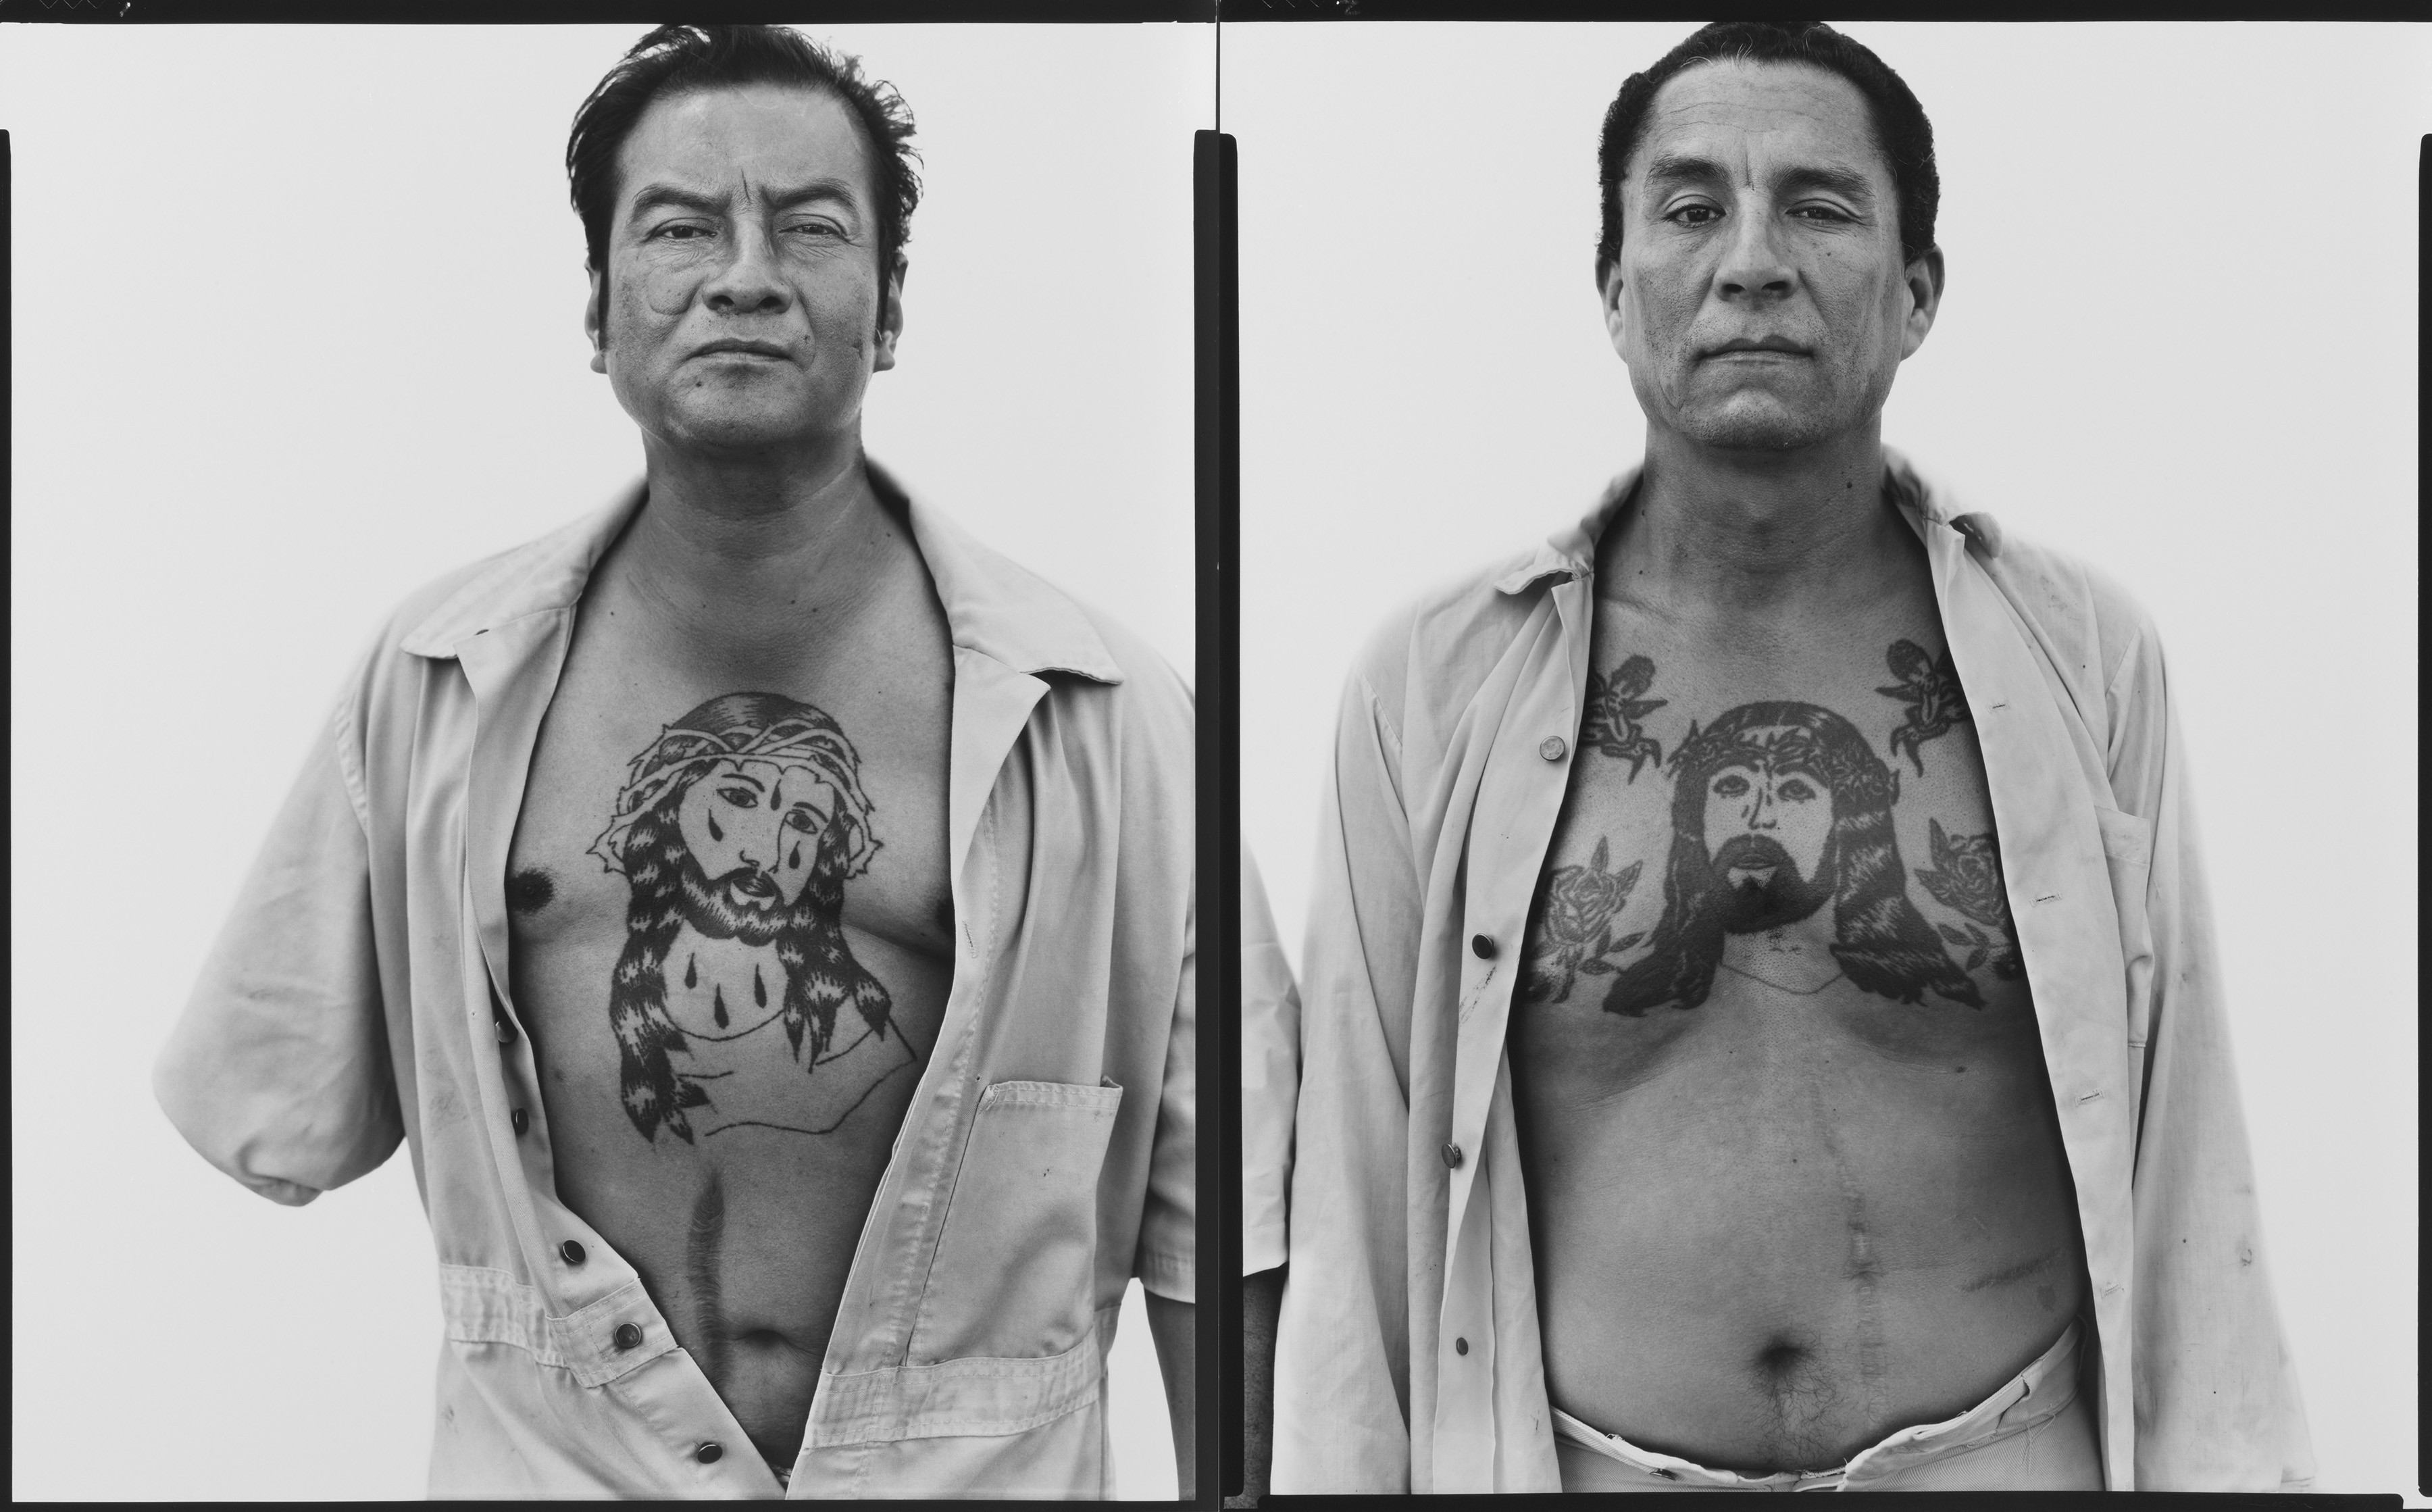 At the Amon Carter, Avedon's West Highlights the Heroic Faces of